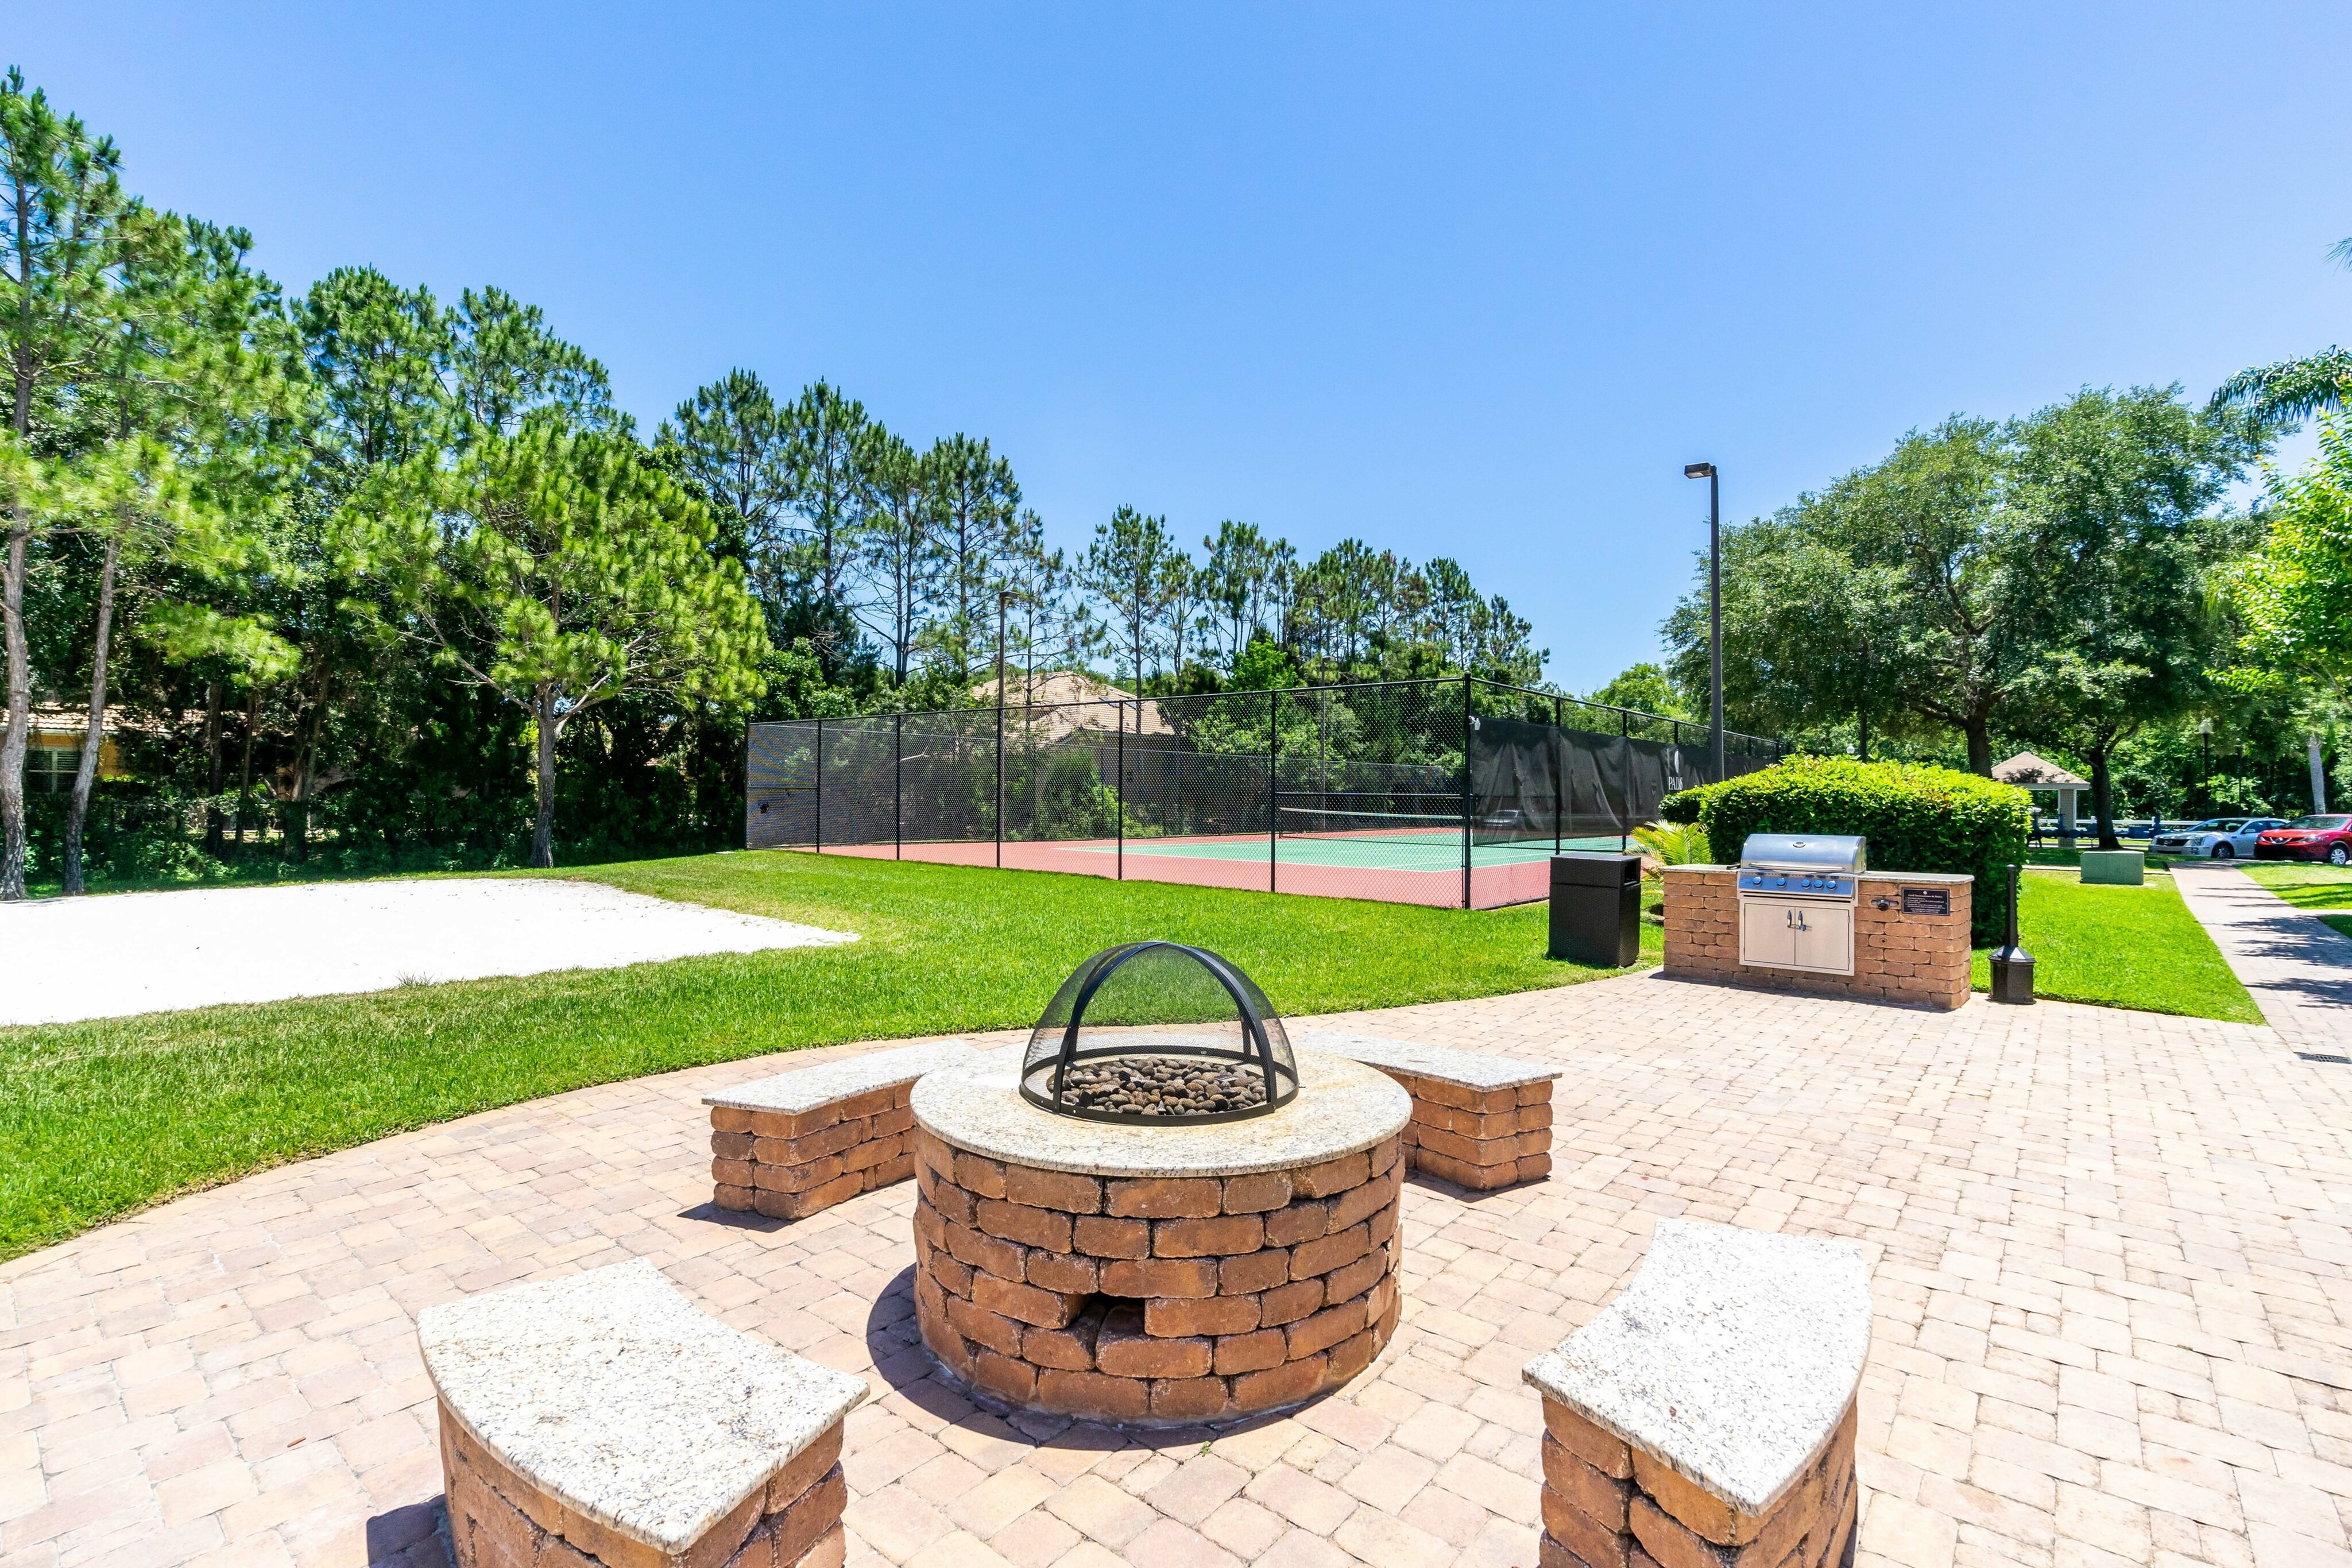 Palms at Wyndtree Firepit, Grill and tennis court